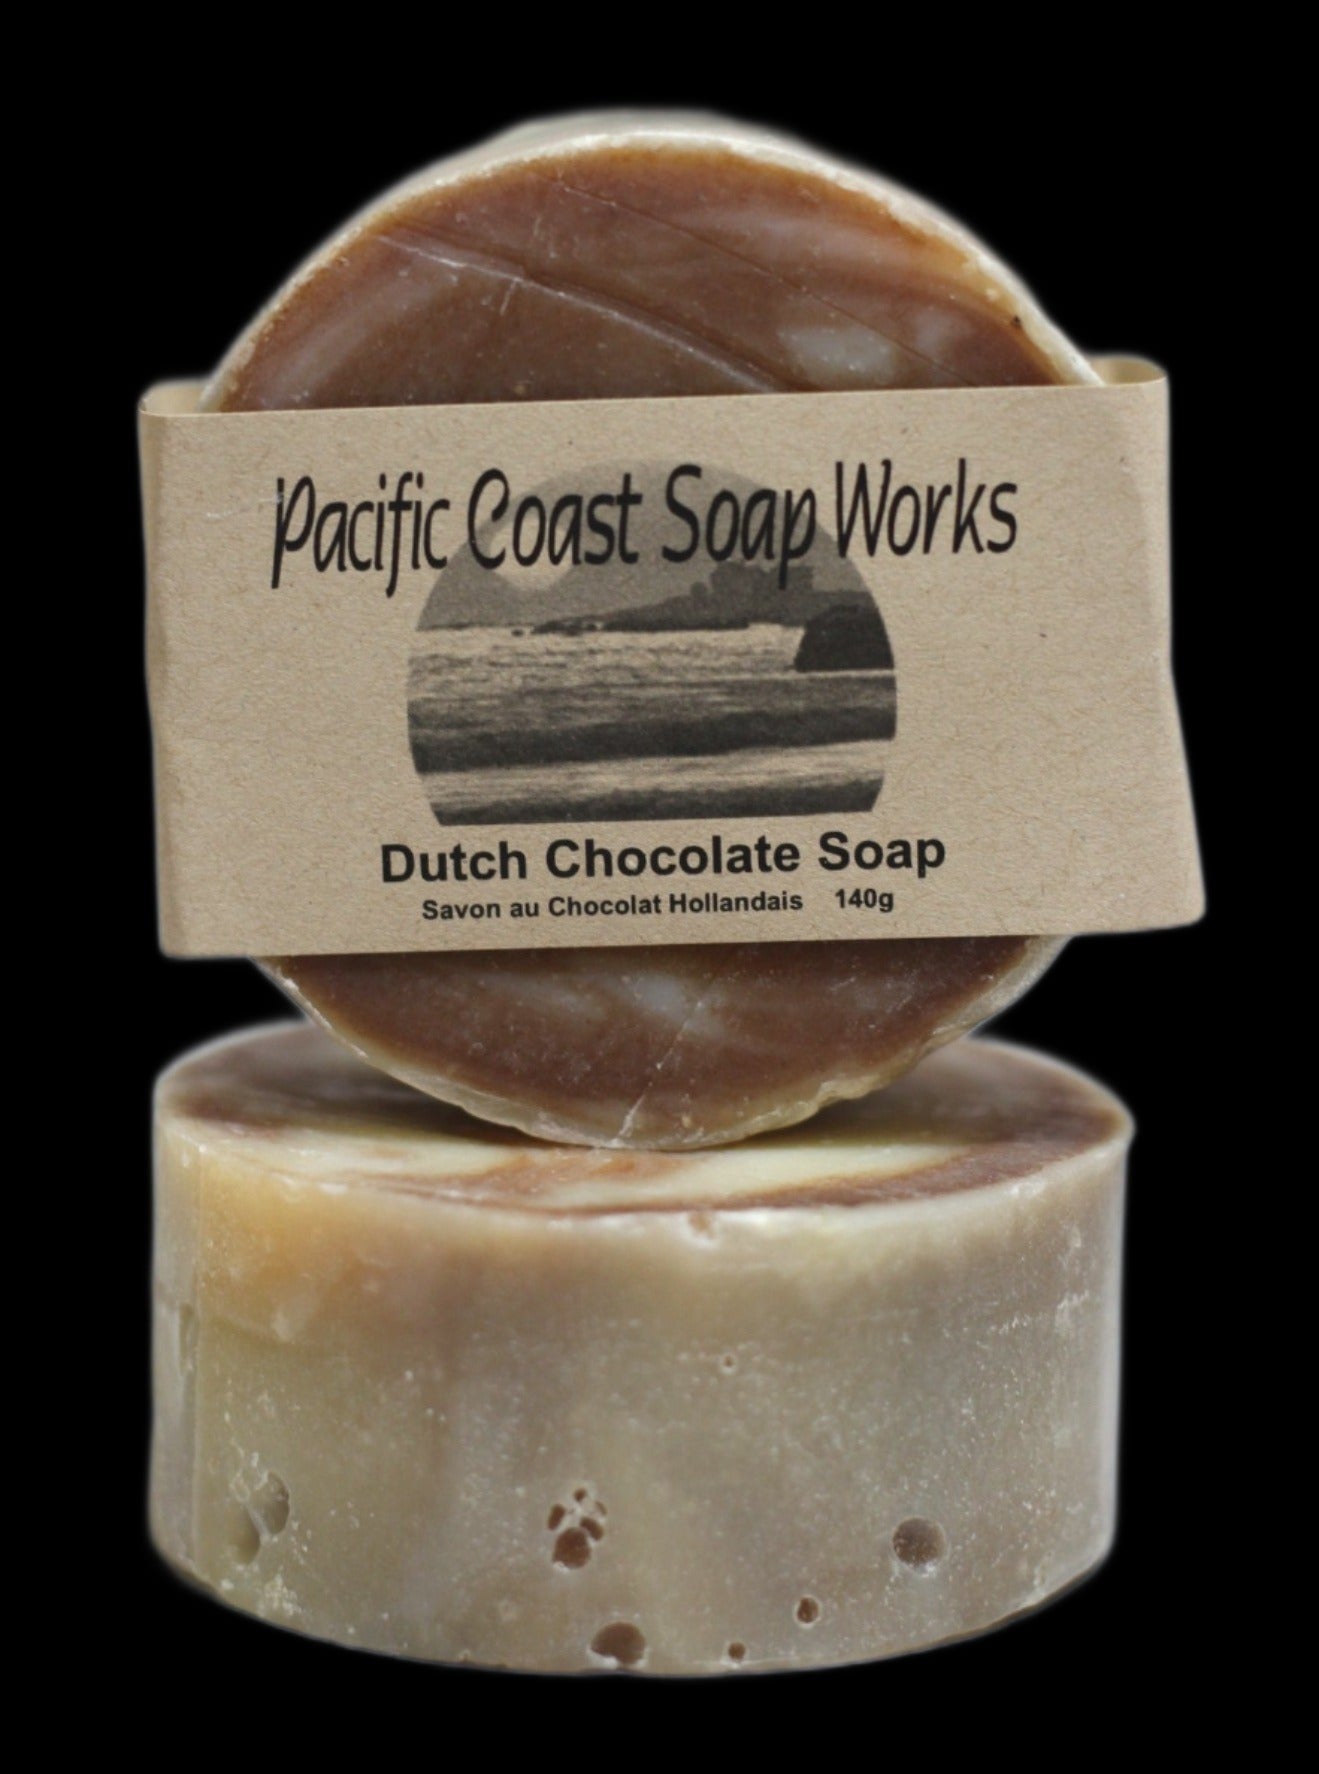 chocolate soap bar mild scrub coconut oil olive oil. natural dutch chocolate soap. handcrafted soap